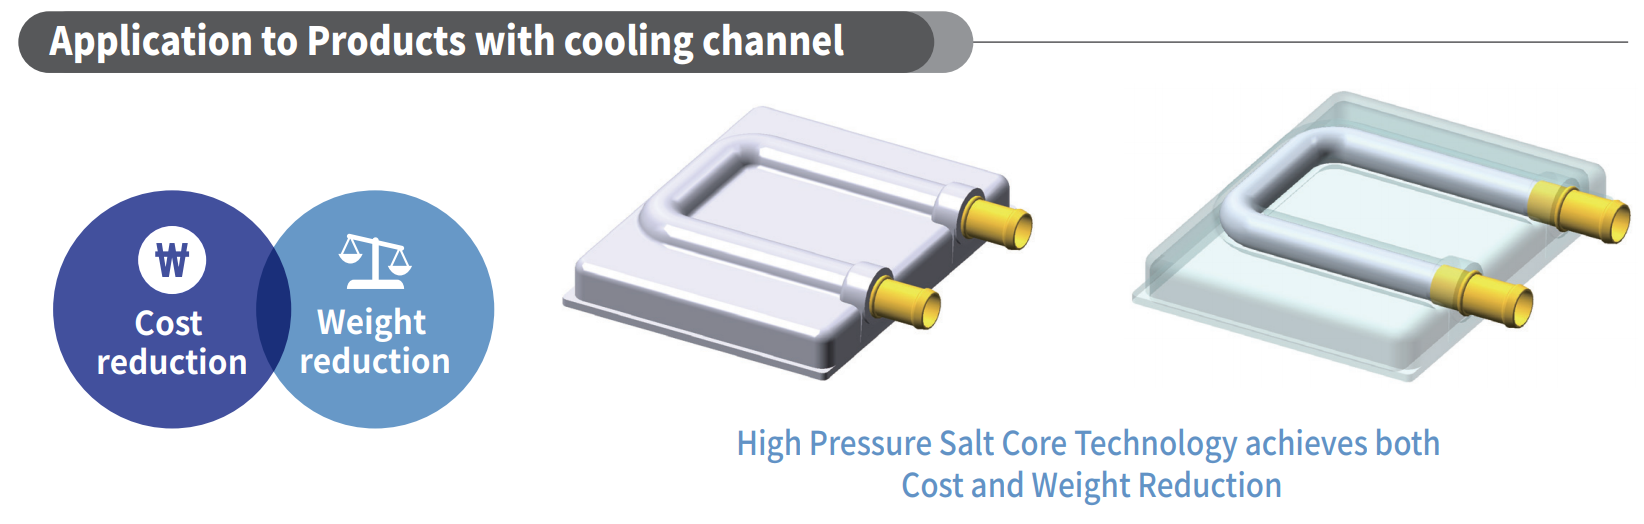 Application to Products with cooling channel